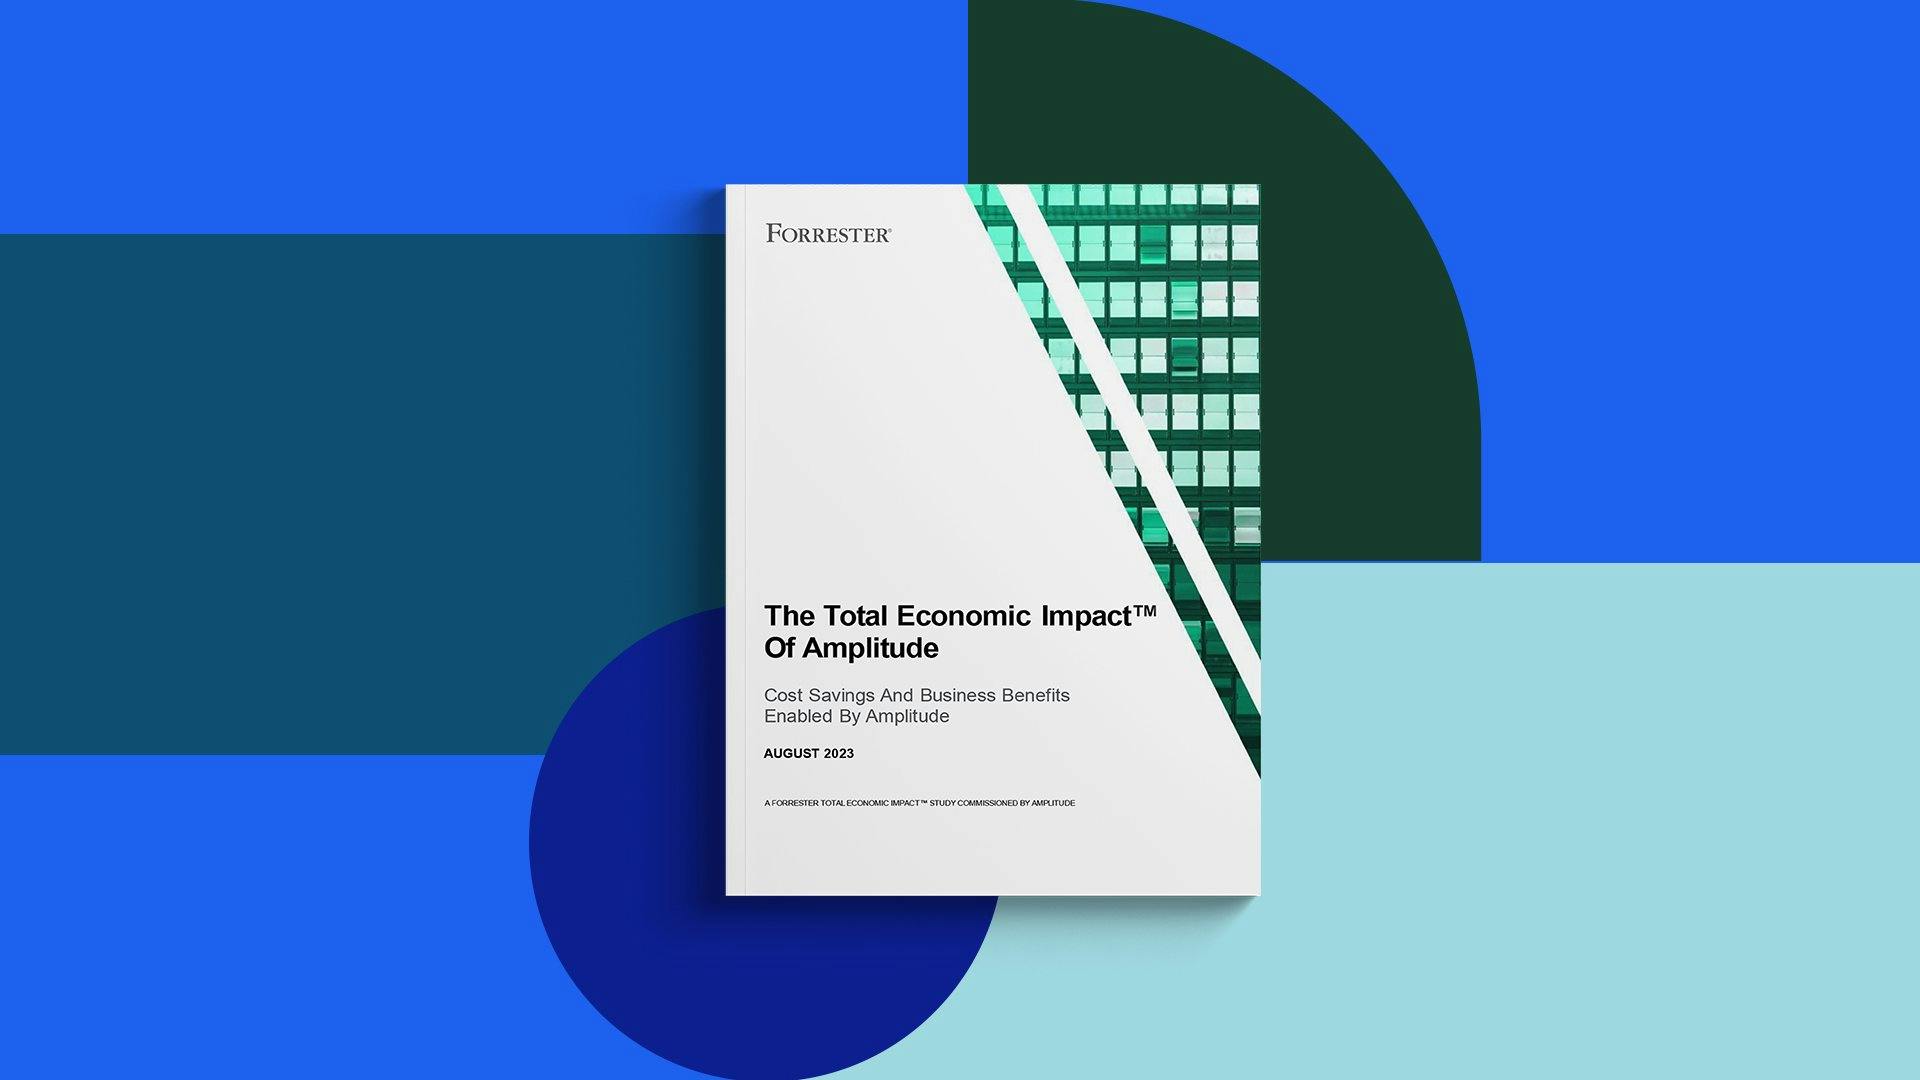 Total Economic Impact™ (TEI) of Amplitude, a commissioned study conducted by Forrester on behalf of Amplitude. 